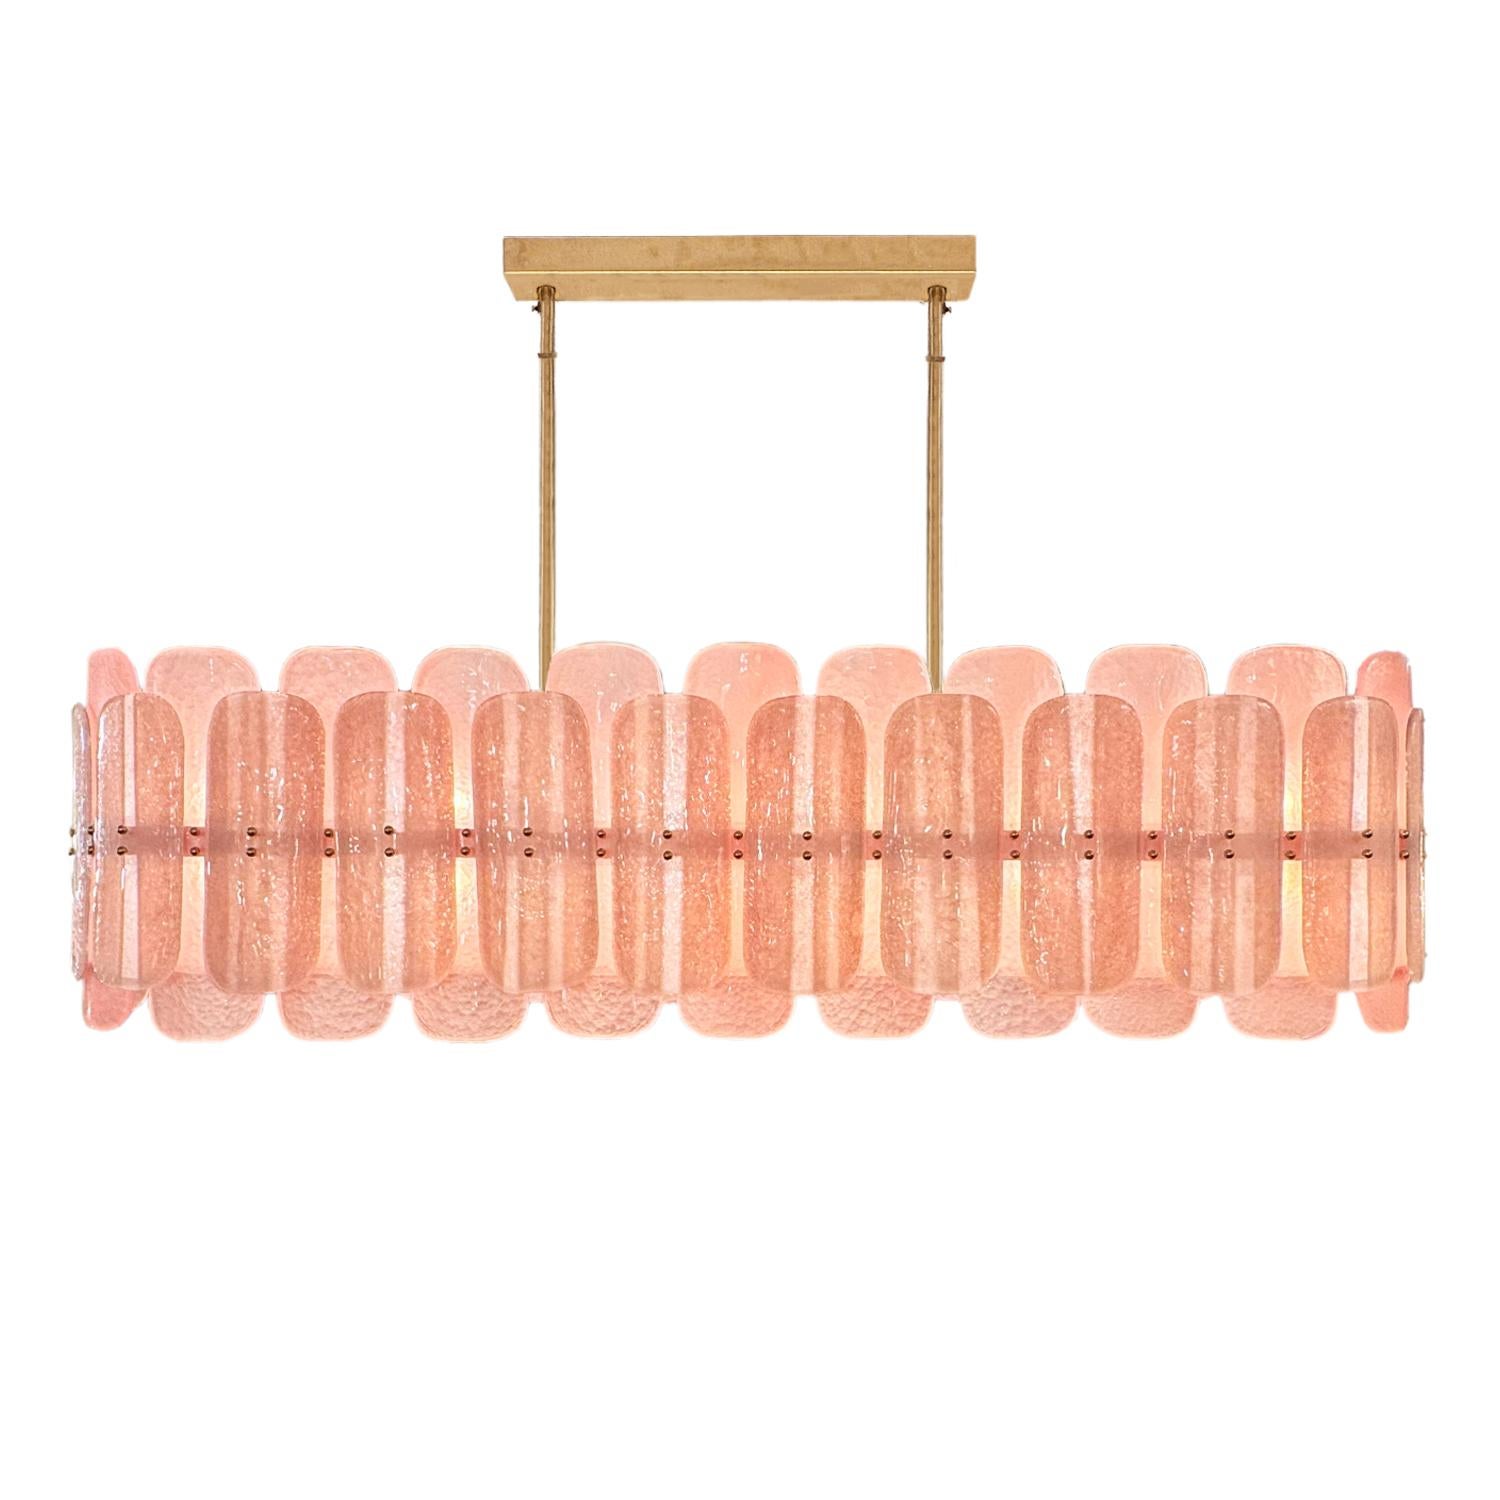 Elegant linear Murano glass tile chandelier with un-lacquered brass frame and canopy. Each gently curved and overlapping glass tile is fastened to the frame with two matched finish ball finials. An opaque glass diffuser running the length of the